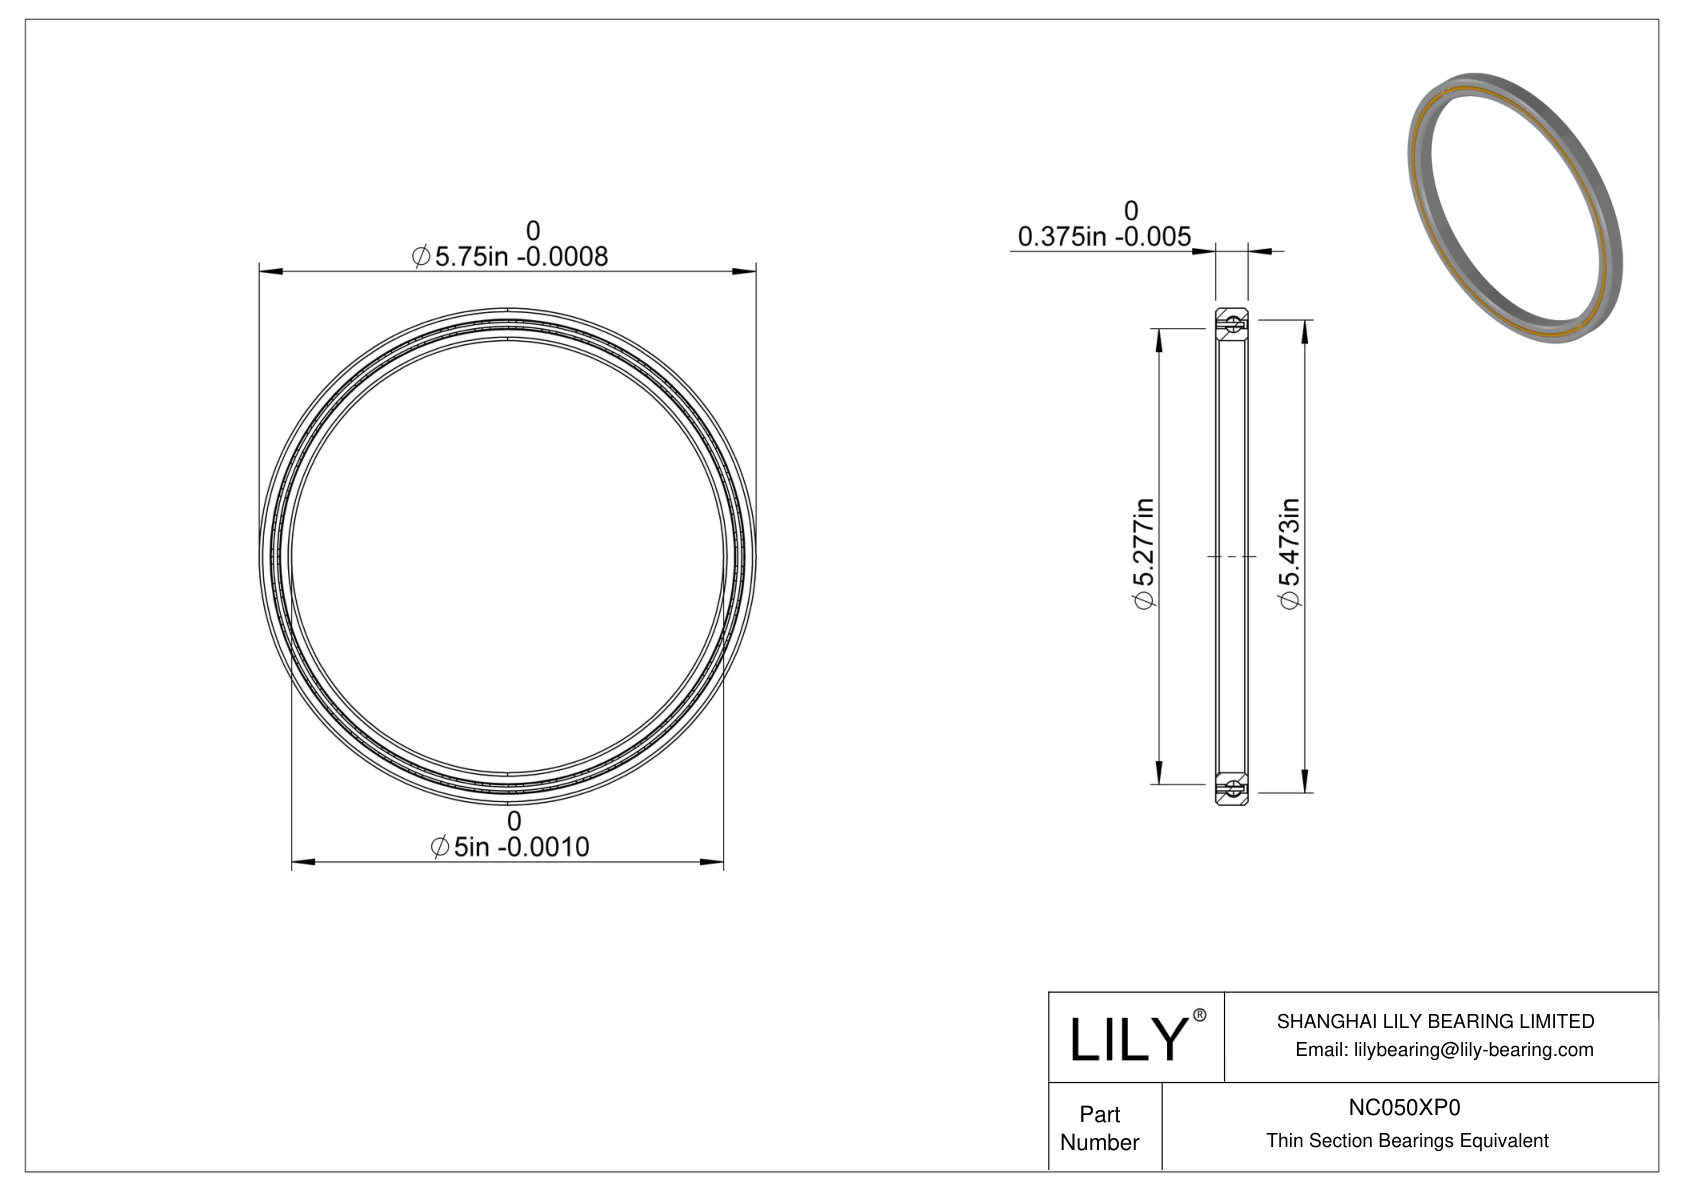 NC050XP0 Constant Section (CS) Bearings cad drawing